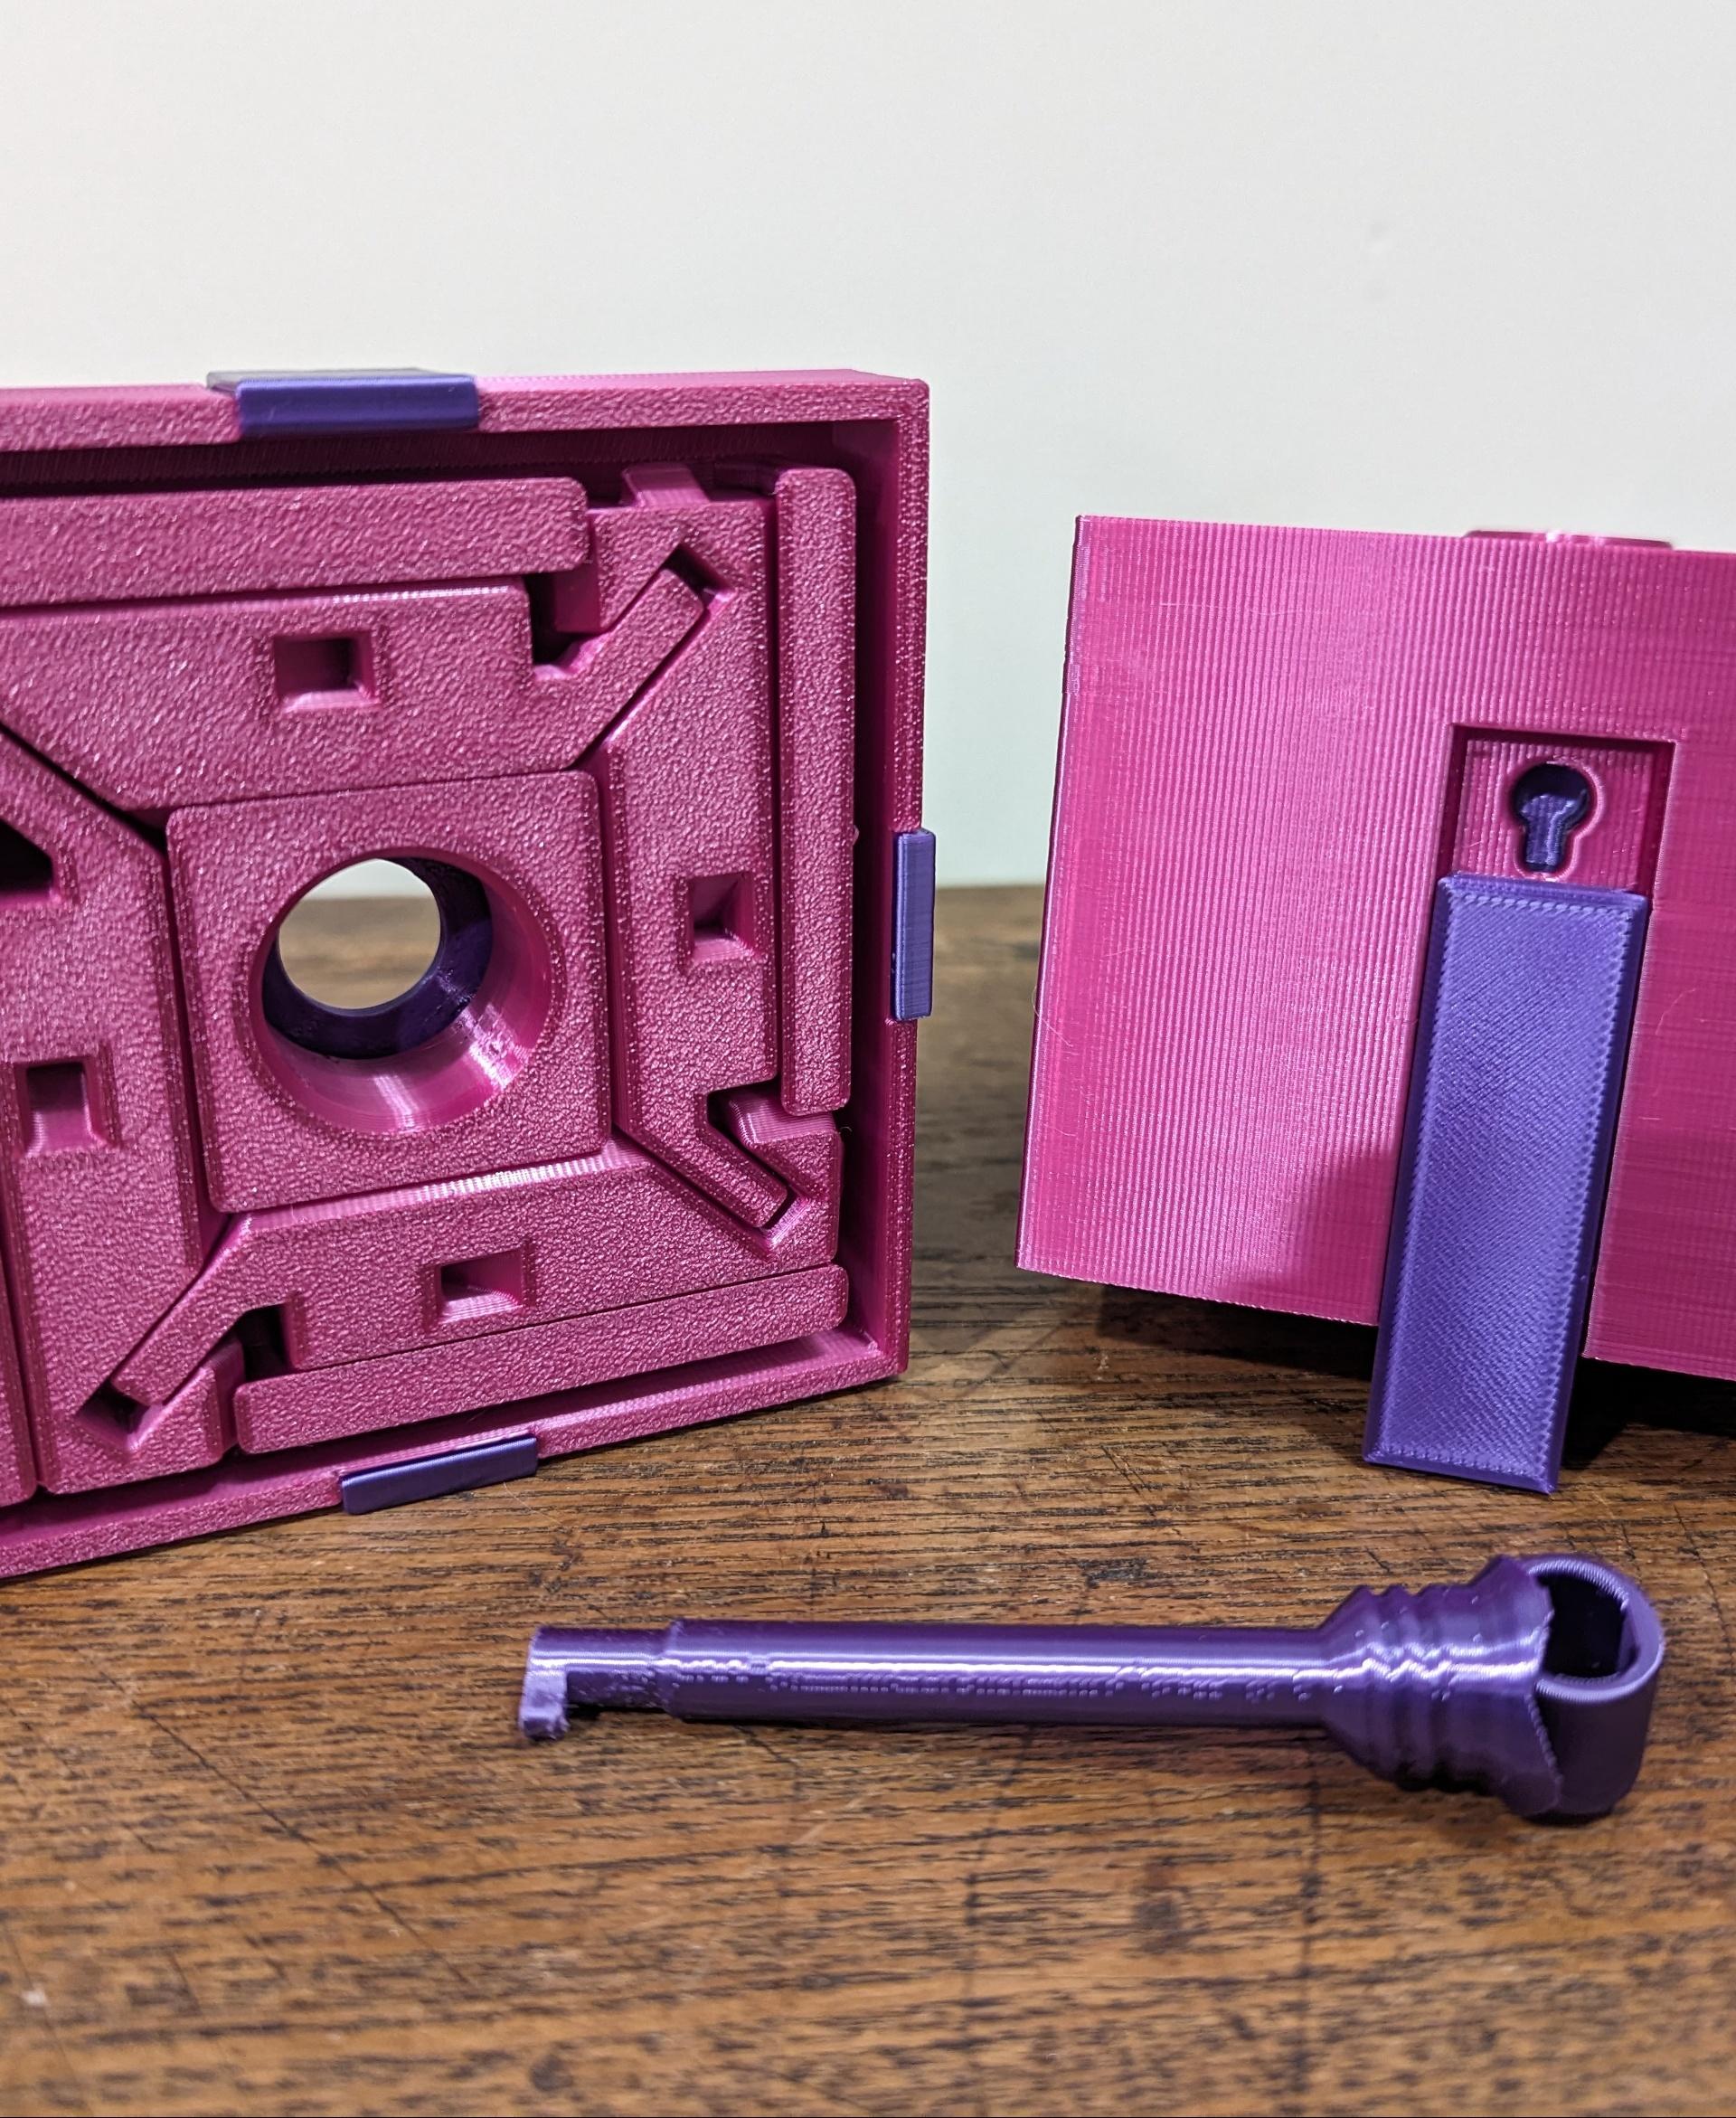 Gift Box #15 - Polymaker Silk Magenta and Silk Purple
#ThangsHolidayMakes - 3d model